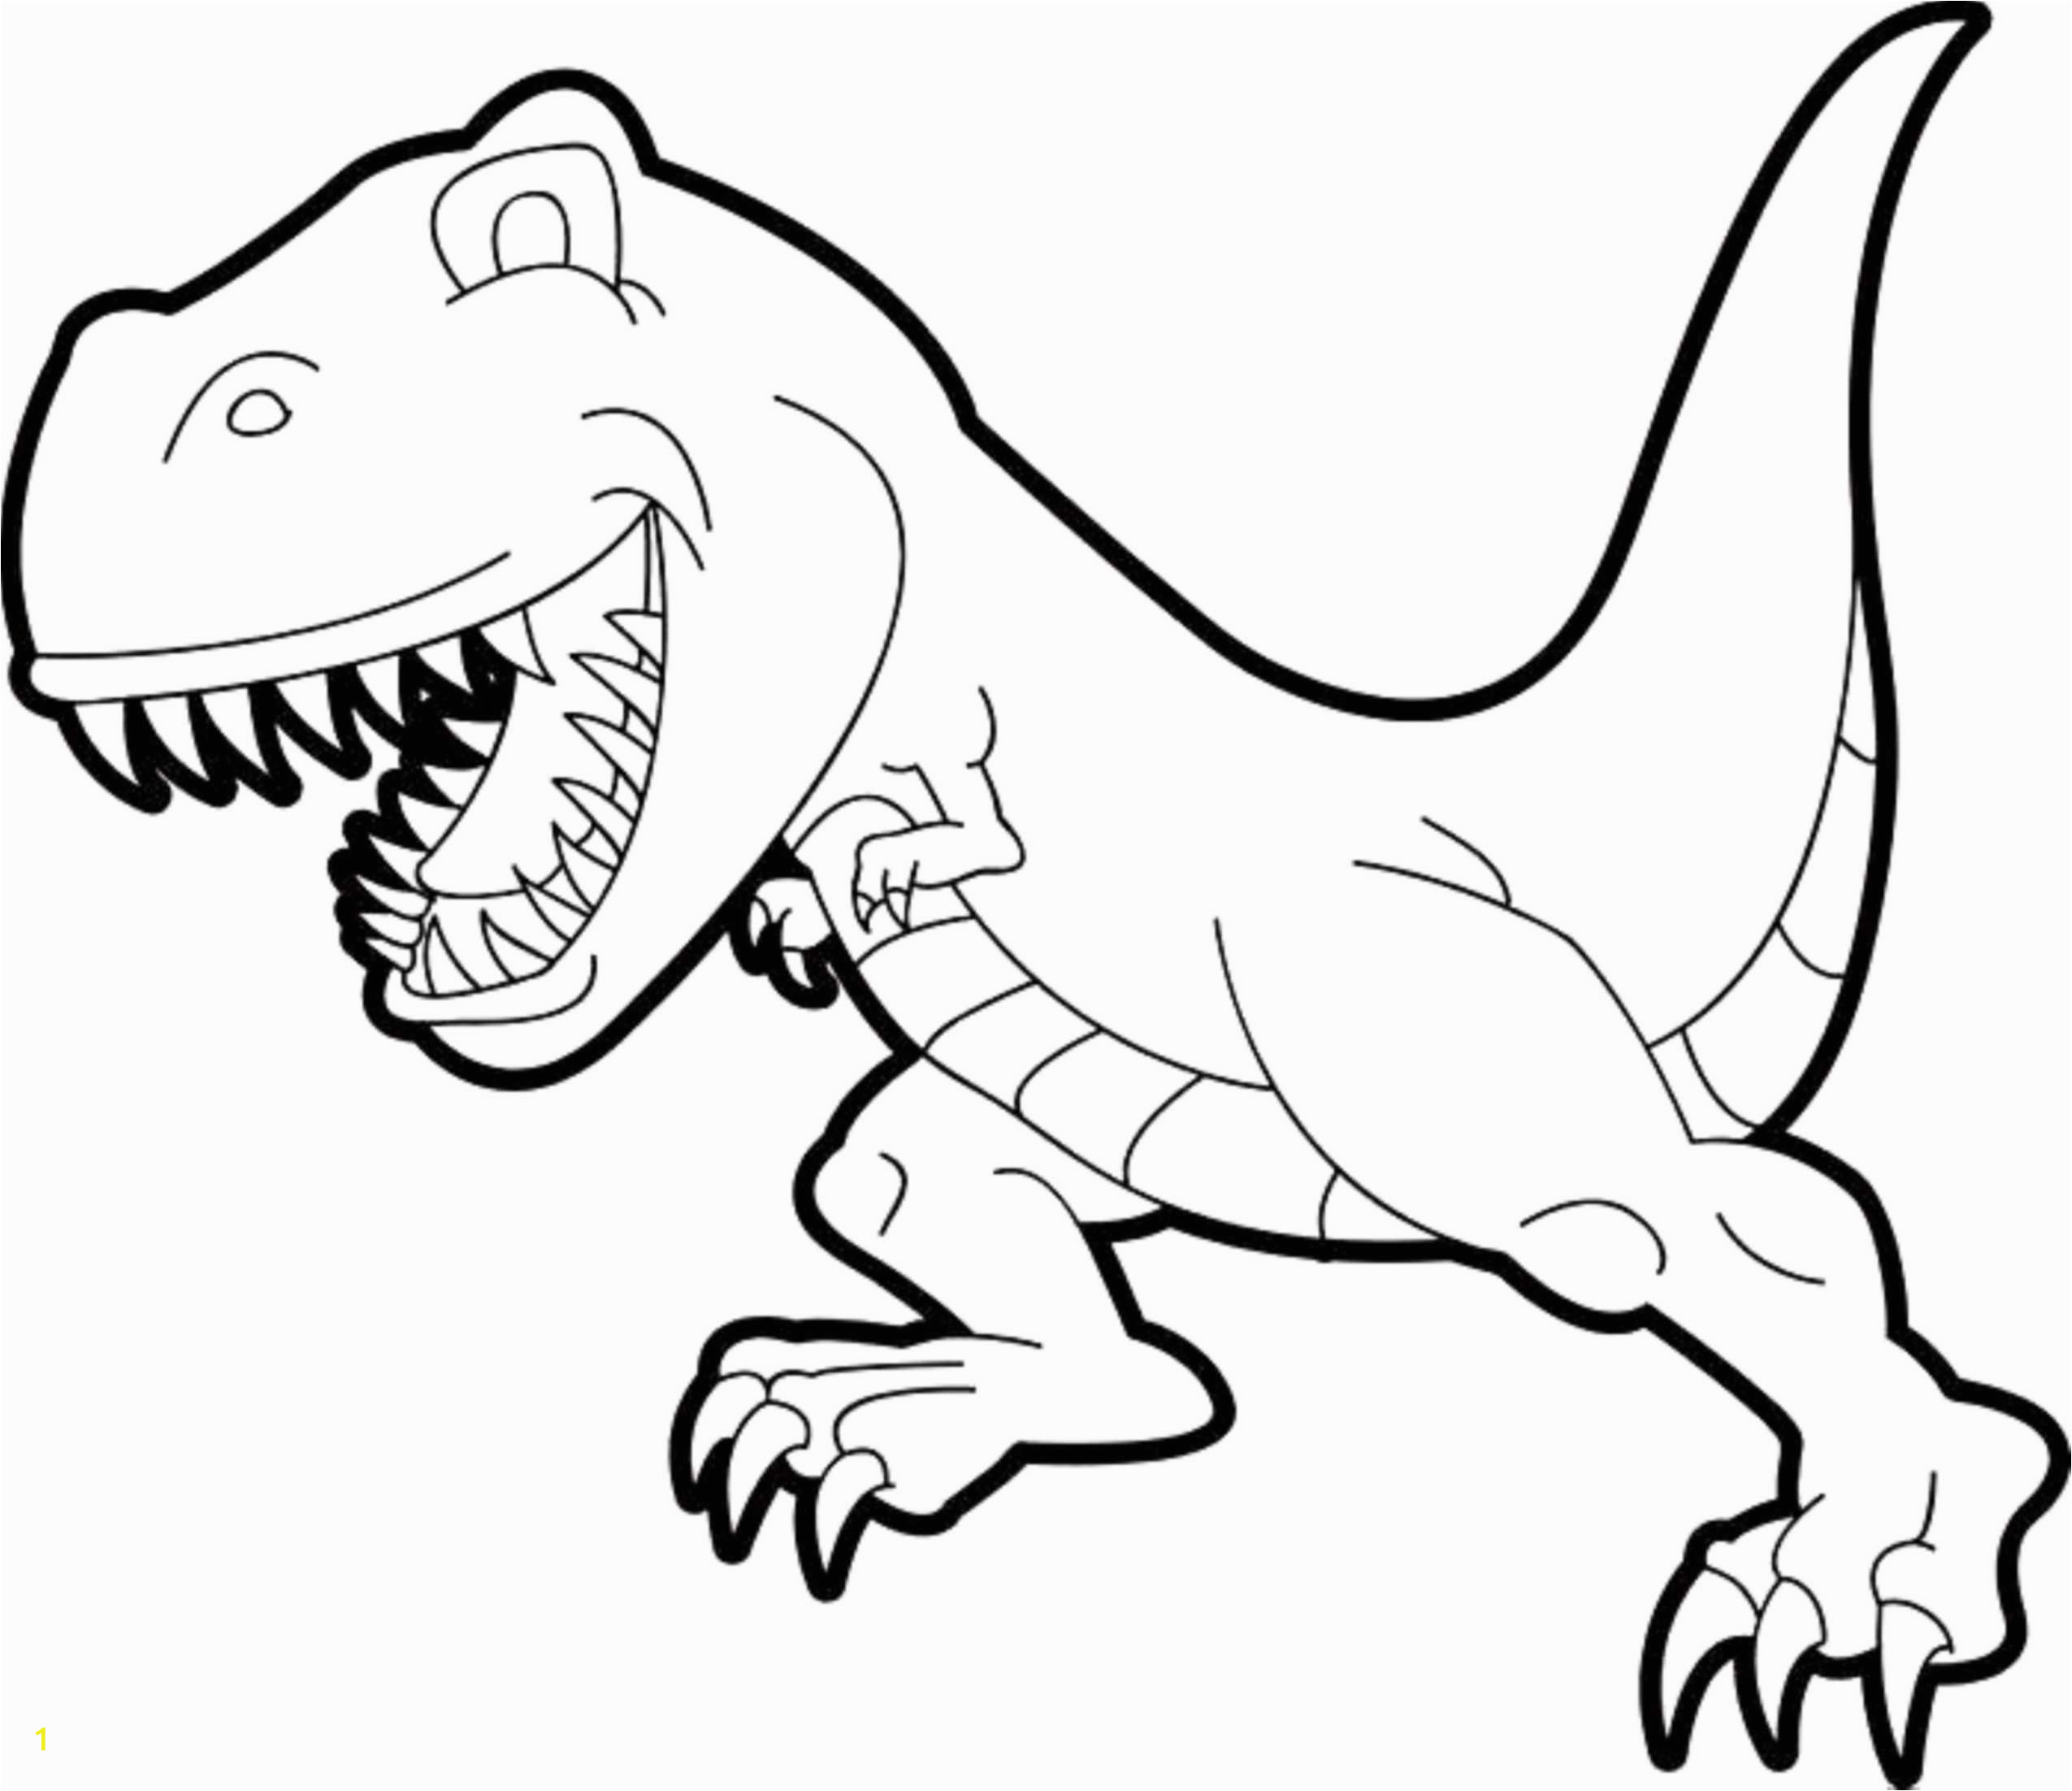 Printable T Rex Coloring Pages Coloring Pages 47 T Rex Coloring Page Image Inspirations